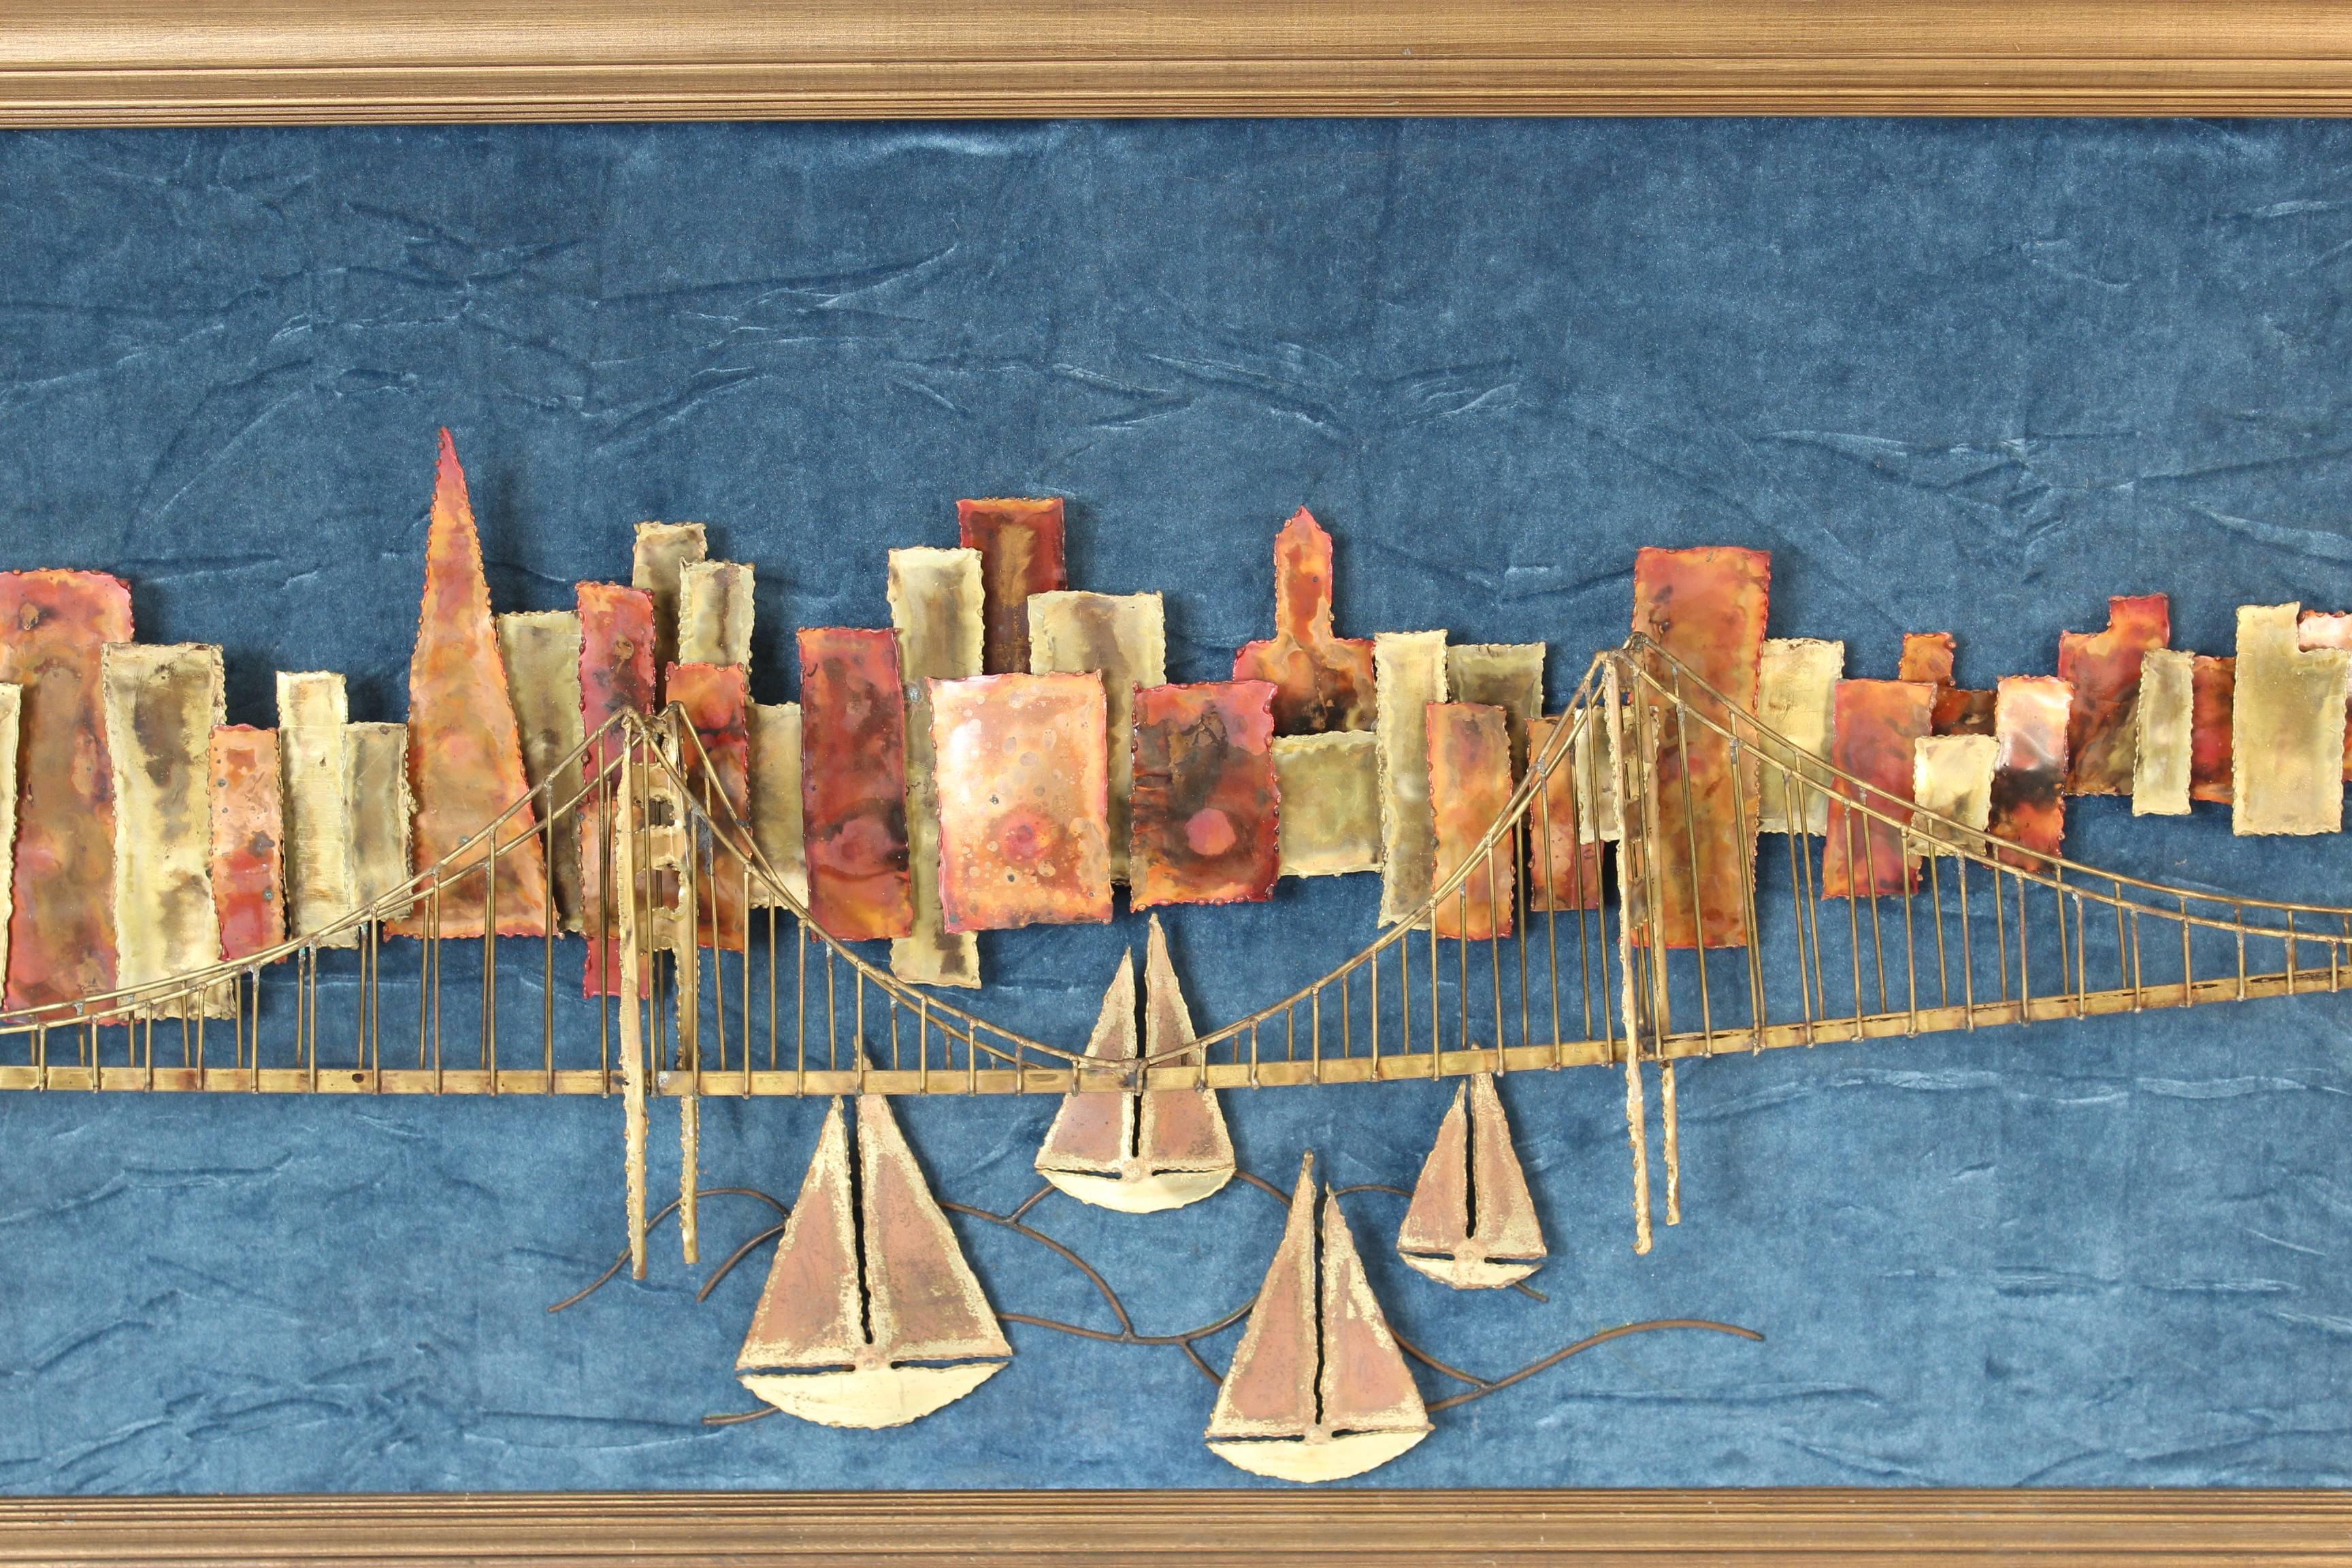 Mixed metal wall sculpture of the San Francisco skyline, Golden Gate bridge and sailboats, on a velvet background, circa 1980s.